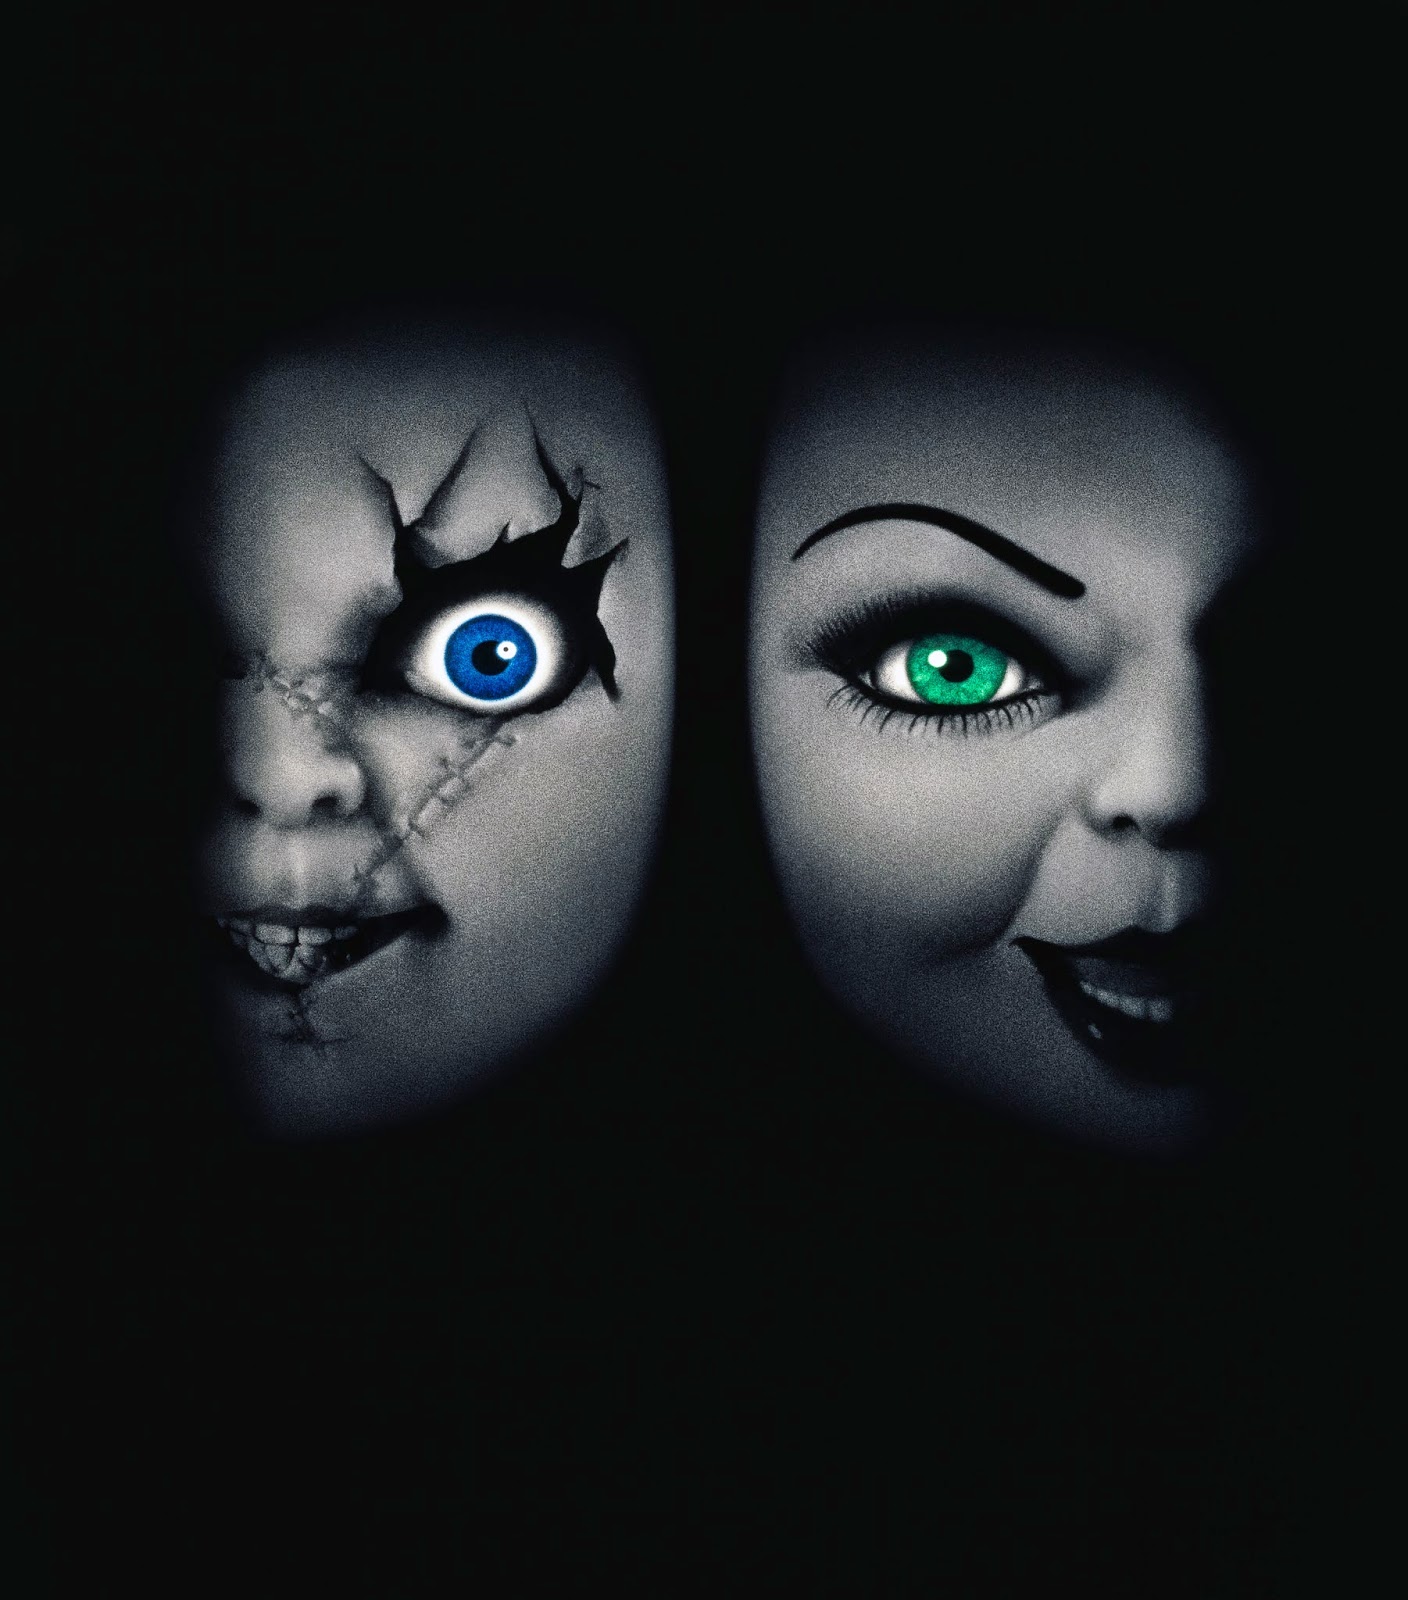 Childs Play 4: Bride Of Chucky (1998)